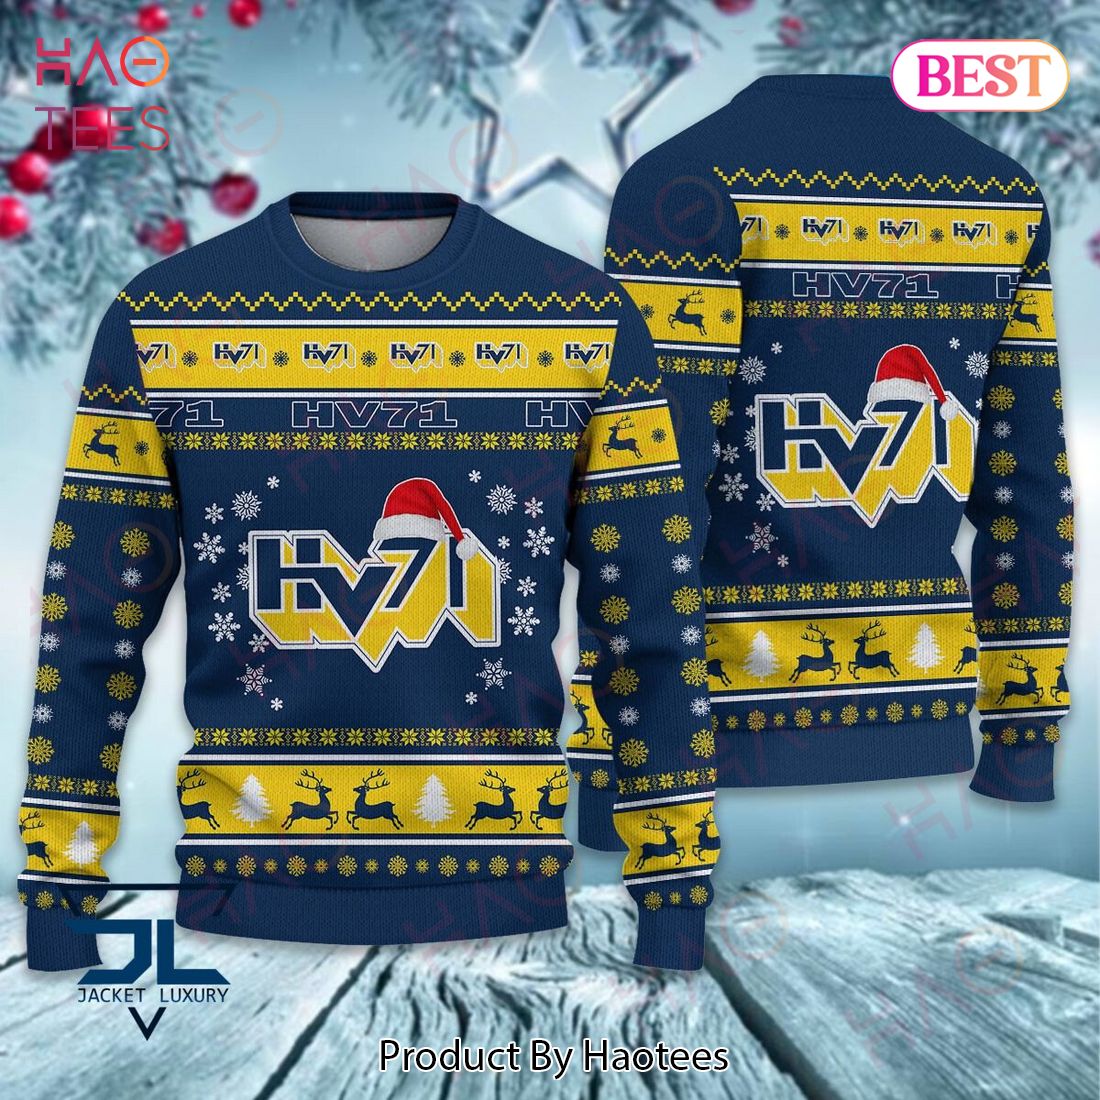 HV71 Blue Mix Gold Christmas Luxury Brand Sweater Limited Edition